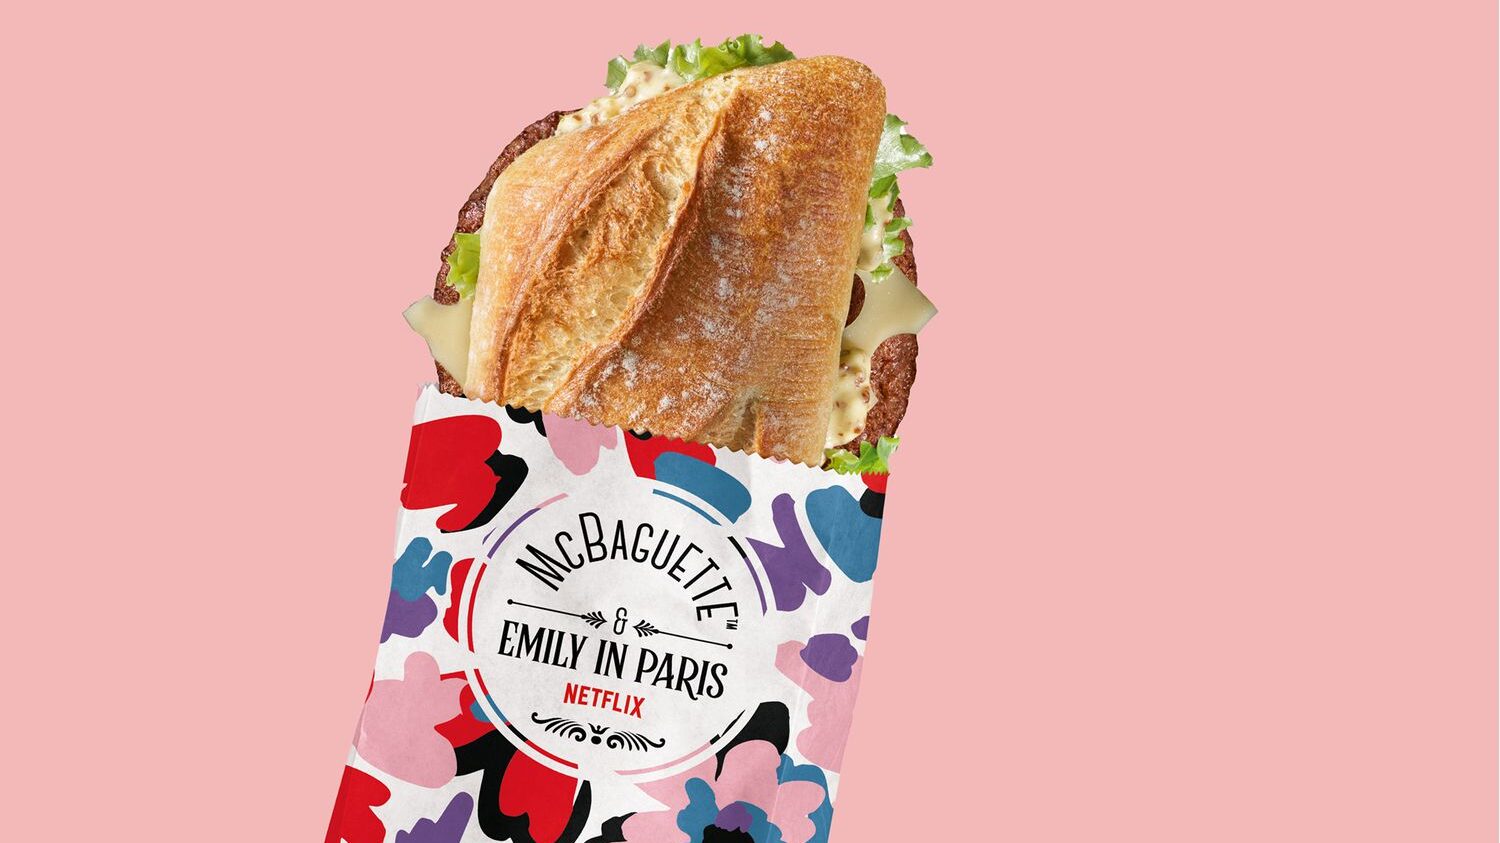 McDonald's limited edition McBaguette in Emily in Paris